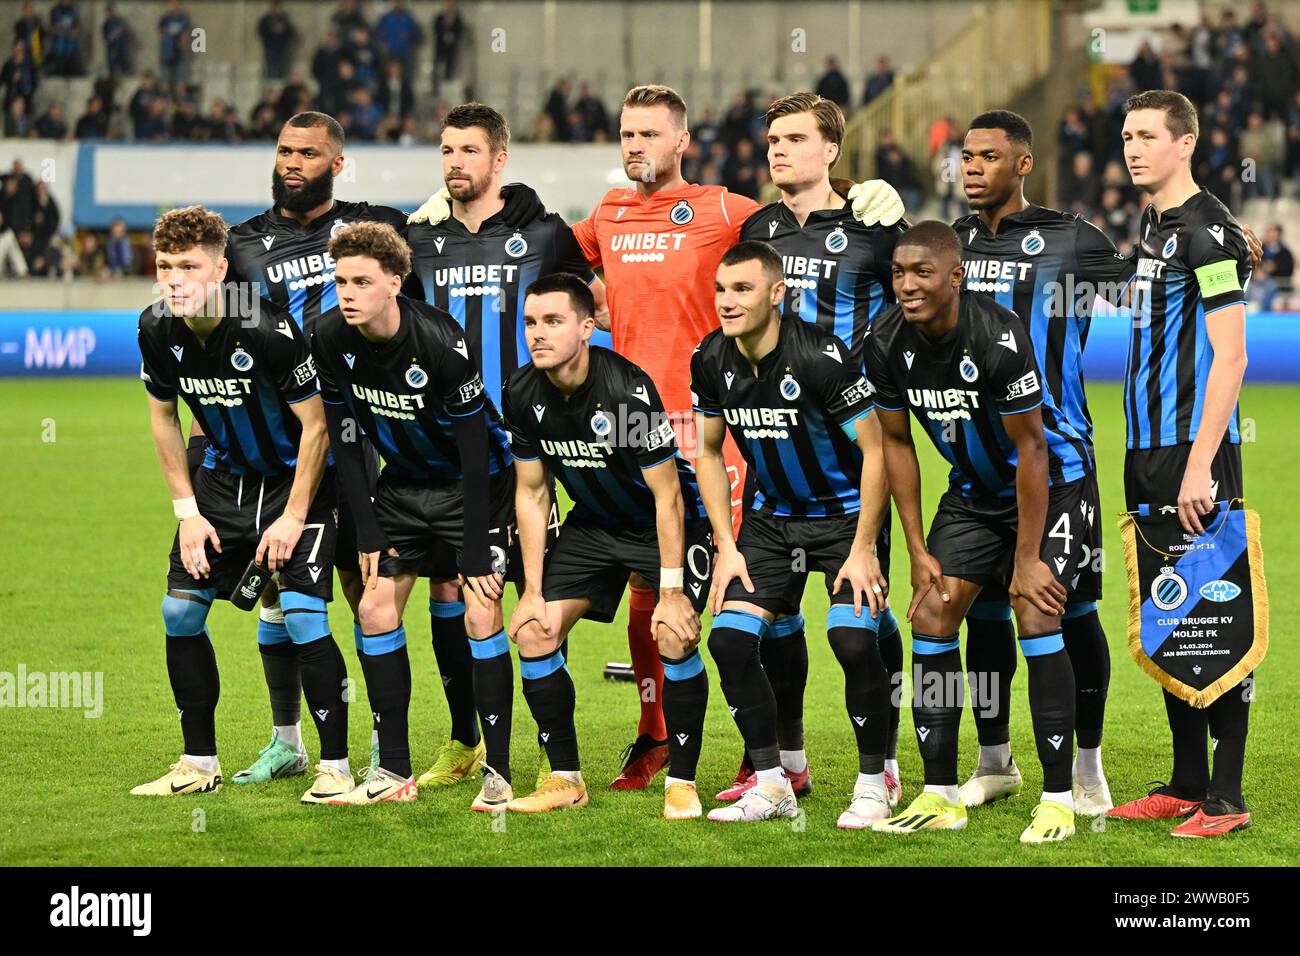 players of Brugge with Igor Thiago (99) of Club Brugge, Brandon Mechele (44) of Club Brugge, goalkeeper Simon Mignolet (22) of Club Brugge, Bjorn Meijer (14) of Club Brugge, Raphael Onyedika (15) of Club Brugge, Hans Vanaken (20) of Club Brugge, Andreas Skov Olsen (7) of Club Brugge, Maxim De Cuyper (55) of Club Brugge, Hugo Vetlesen (10) of Club Brugge, Ferran Jutgla (9) of Club Brugge and Joel Ordonez (4) of Club Brugge pose for a team photo during the Uefa Conference League round of 16 - second leg game in the 2023-2024 season between Club Brugge KV and Molde FK on March 14, 2024 in Brugg Stock Photo